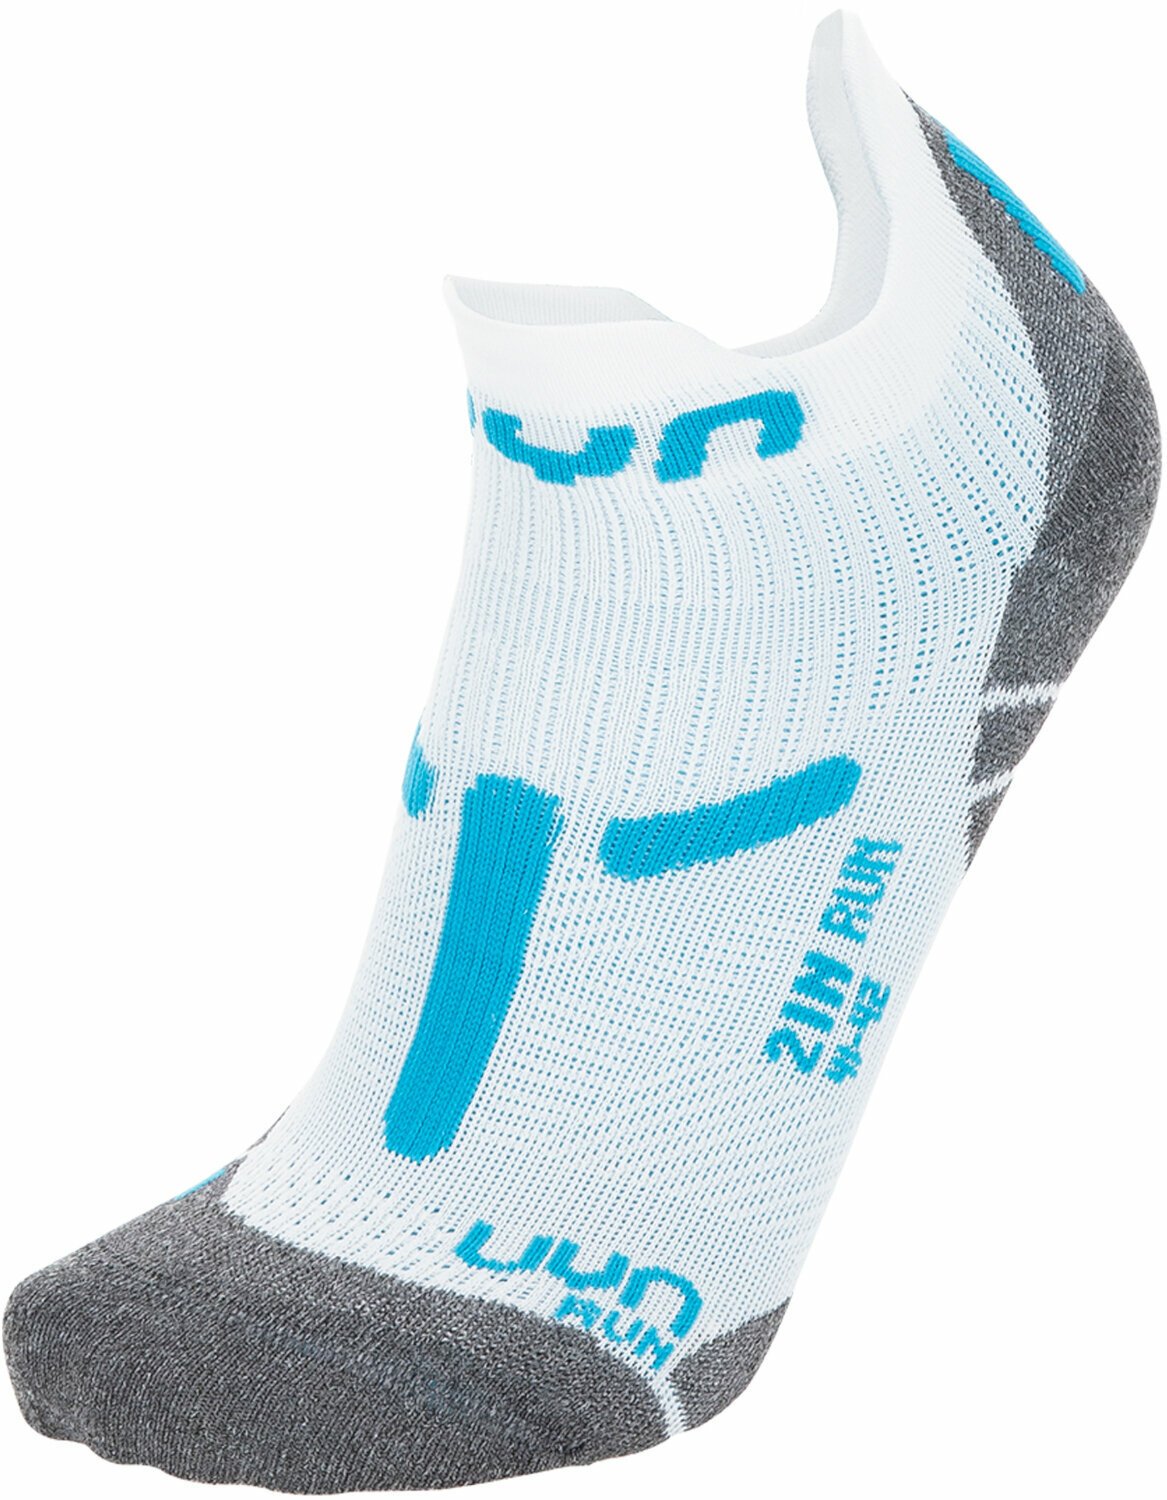 Calcetines para correr UYN Run 2in Turquoise-White 35/36 Calcetines para correr